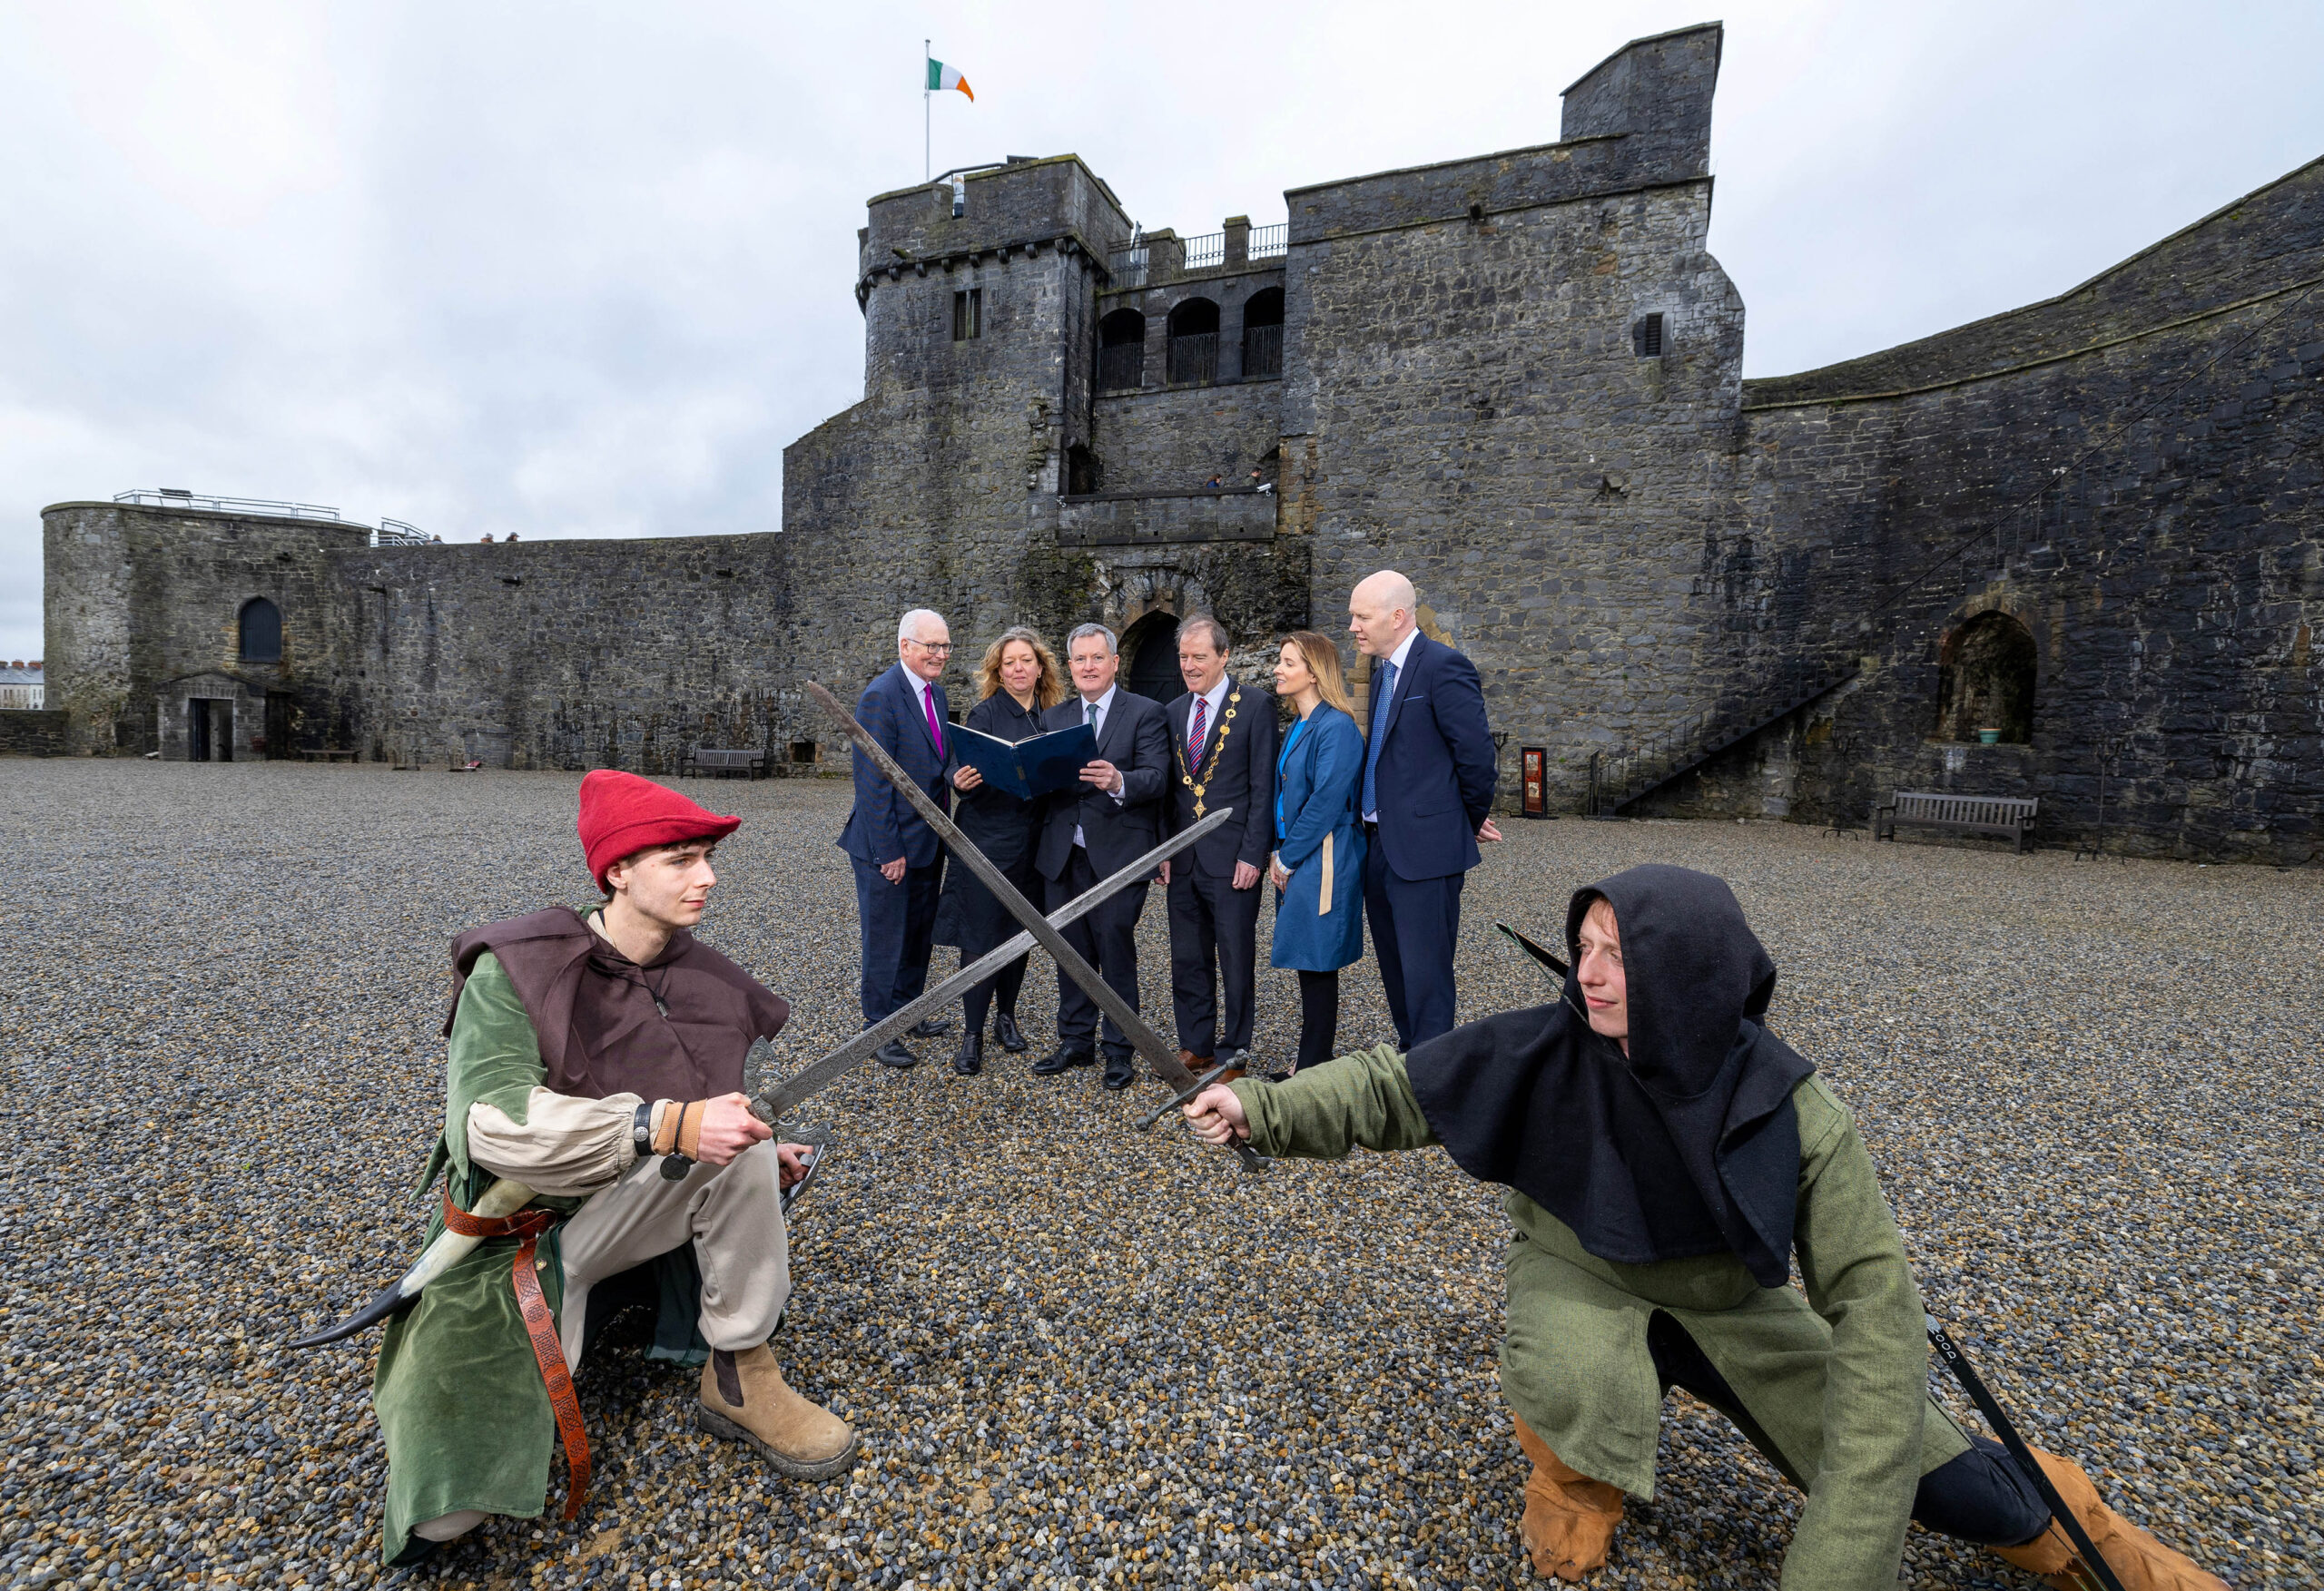 REPRO FREE Another new chapter is set to be written for Limerick’s most storied building, King John’s Castle, with international design consultants appointed to prepare a Masterplan that will guide the transformation of the iconic 13th century castle into a world-class visitor attraction. A multi-disciplinary Design Team headed up by international design practice Galmstrup Architects has been appointed to create a roadmap for maximising the potential of one of Ireland’s foremost cultural and heritage sites. The King John’s Castle Masterplan, which is funded by Department of Housing, Local Government and Heritage, is the latest initiative by the wholly owned Limerick City and County Council subsidiary, Discover Limerick Development Activity Company (DAC), which was launched two years ago by the local authority to maximise key tourism attractions and grow visitor numbers in the county. The consultants have been appointed following a public procurement competition conducted through the course of 2023. The masterplan will be expected to identify opportunity for investment in an exciting and innovative visitor offering for the Castle that takes a holistic approach to the city-wide and site-wide components of the visitor experience, increasing the value of the castle as a visitor attraction that delivers sustainable socio-economic benefits for the city and region. Pictured L-R Tim O’Connor, Interim Chairperson of Discover Limerick DAC, Anne Marie Galmstrup, Director of Galmstrup Architects, Kieran O’ Donnell TD, Minister of State with Responsibility for Local Government and Planning, Cllr Gerald Mitchell, Mayor of the City and County of Limerick, Miriam Kennedy, Failte Ireland and Gordon Daly, Director of Economic Development and Tourism, Limerick City and County Council, with responsibility for Discover Limerick DAC. Pictured also are King John’s Castle animators; Michael Casey, Eoghan Clark, Ocean McCormack. Pic Arthur Ellis.